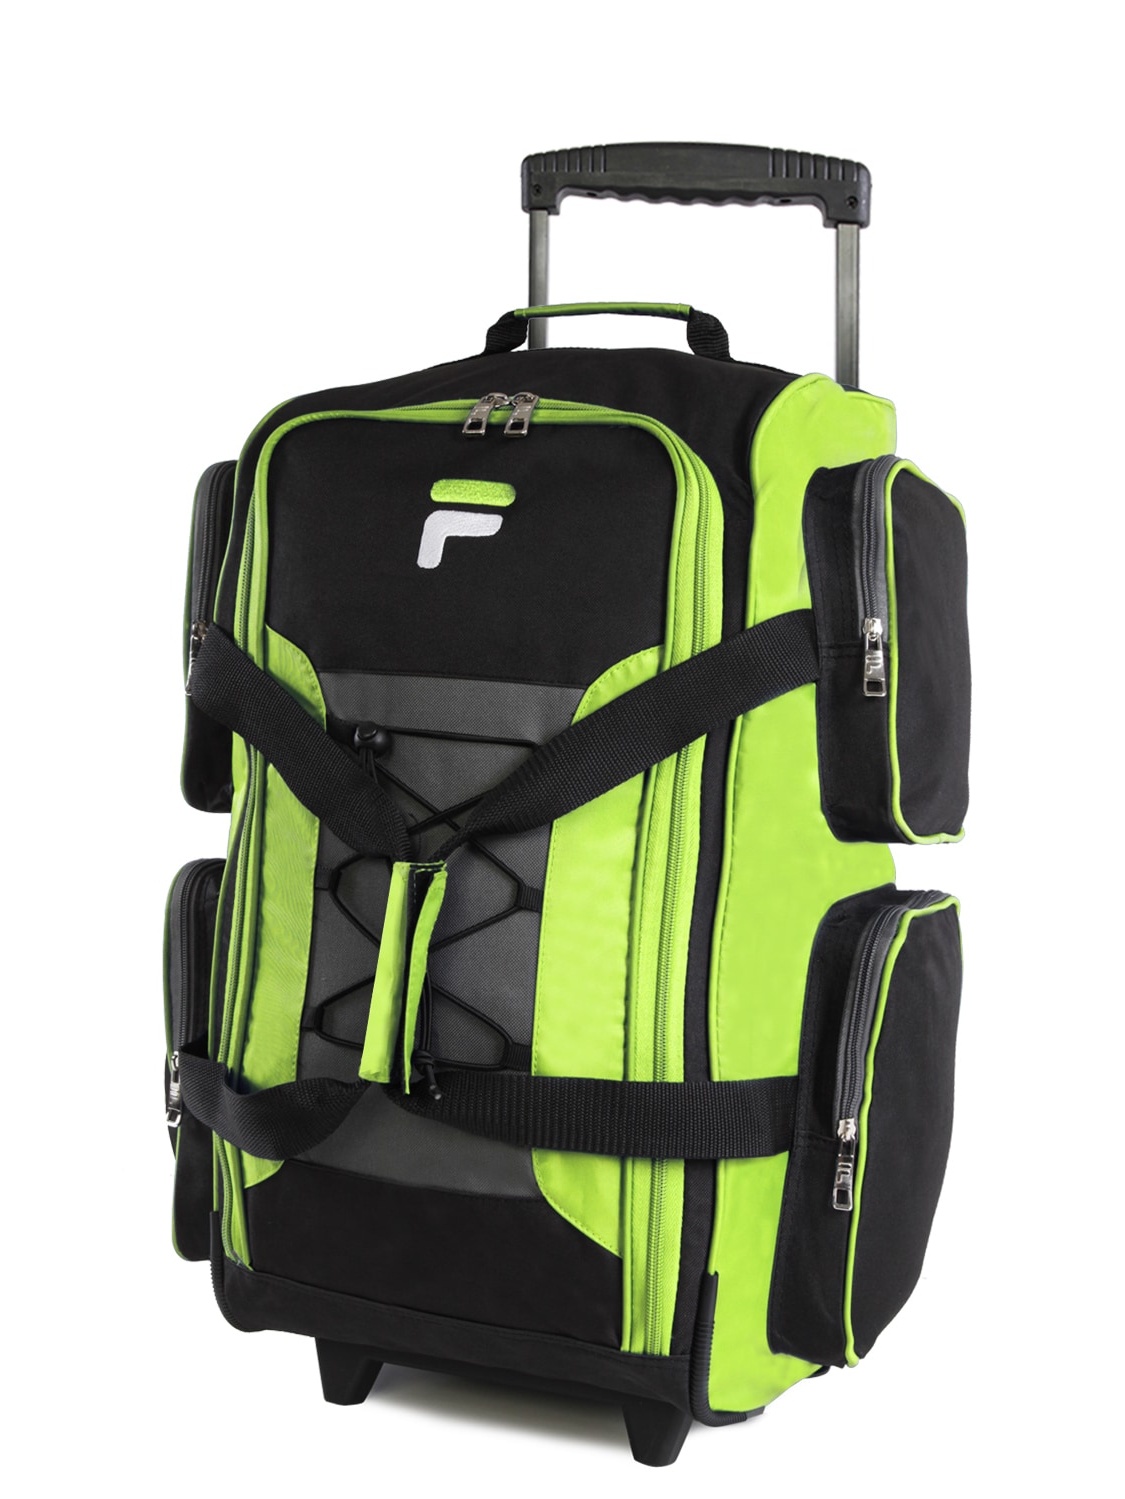 22-inch Lightweight Carry-on Rolling Duffel Bag - image 3 of 5